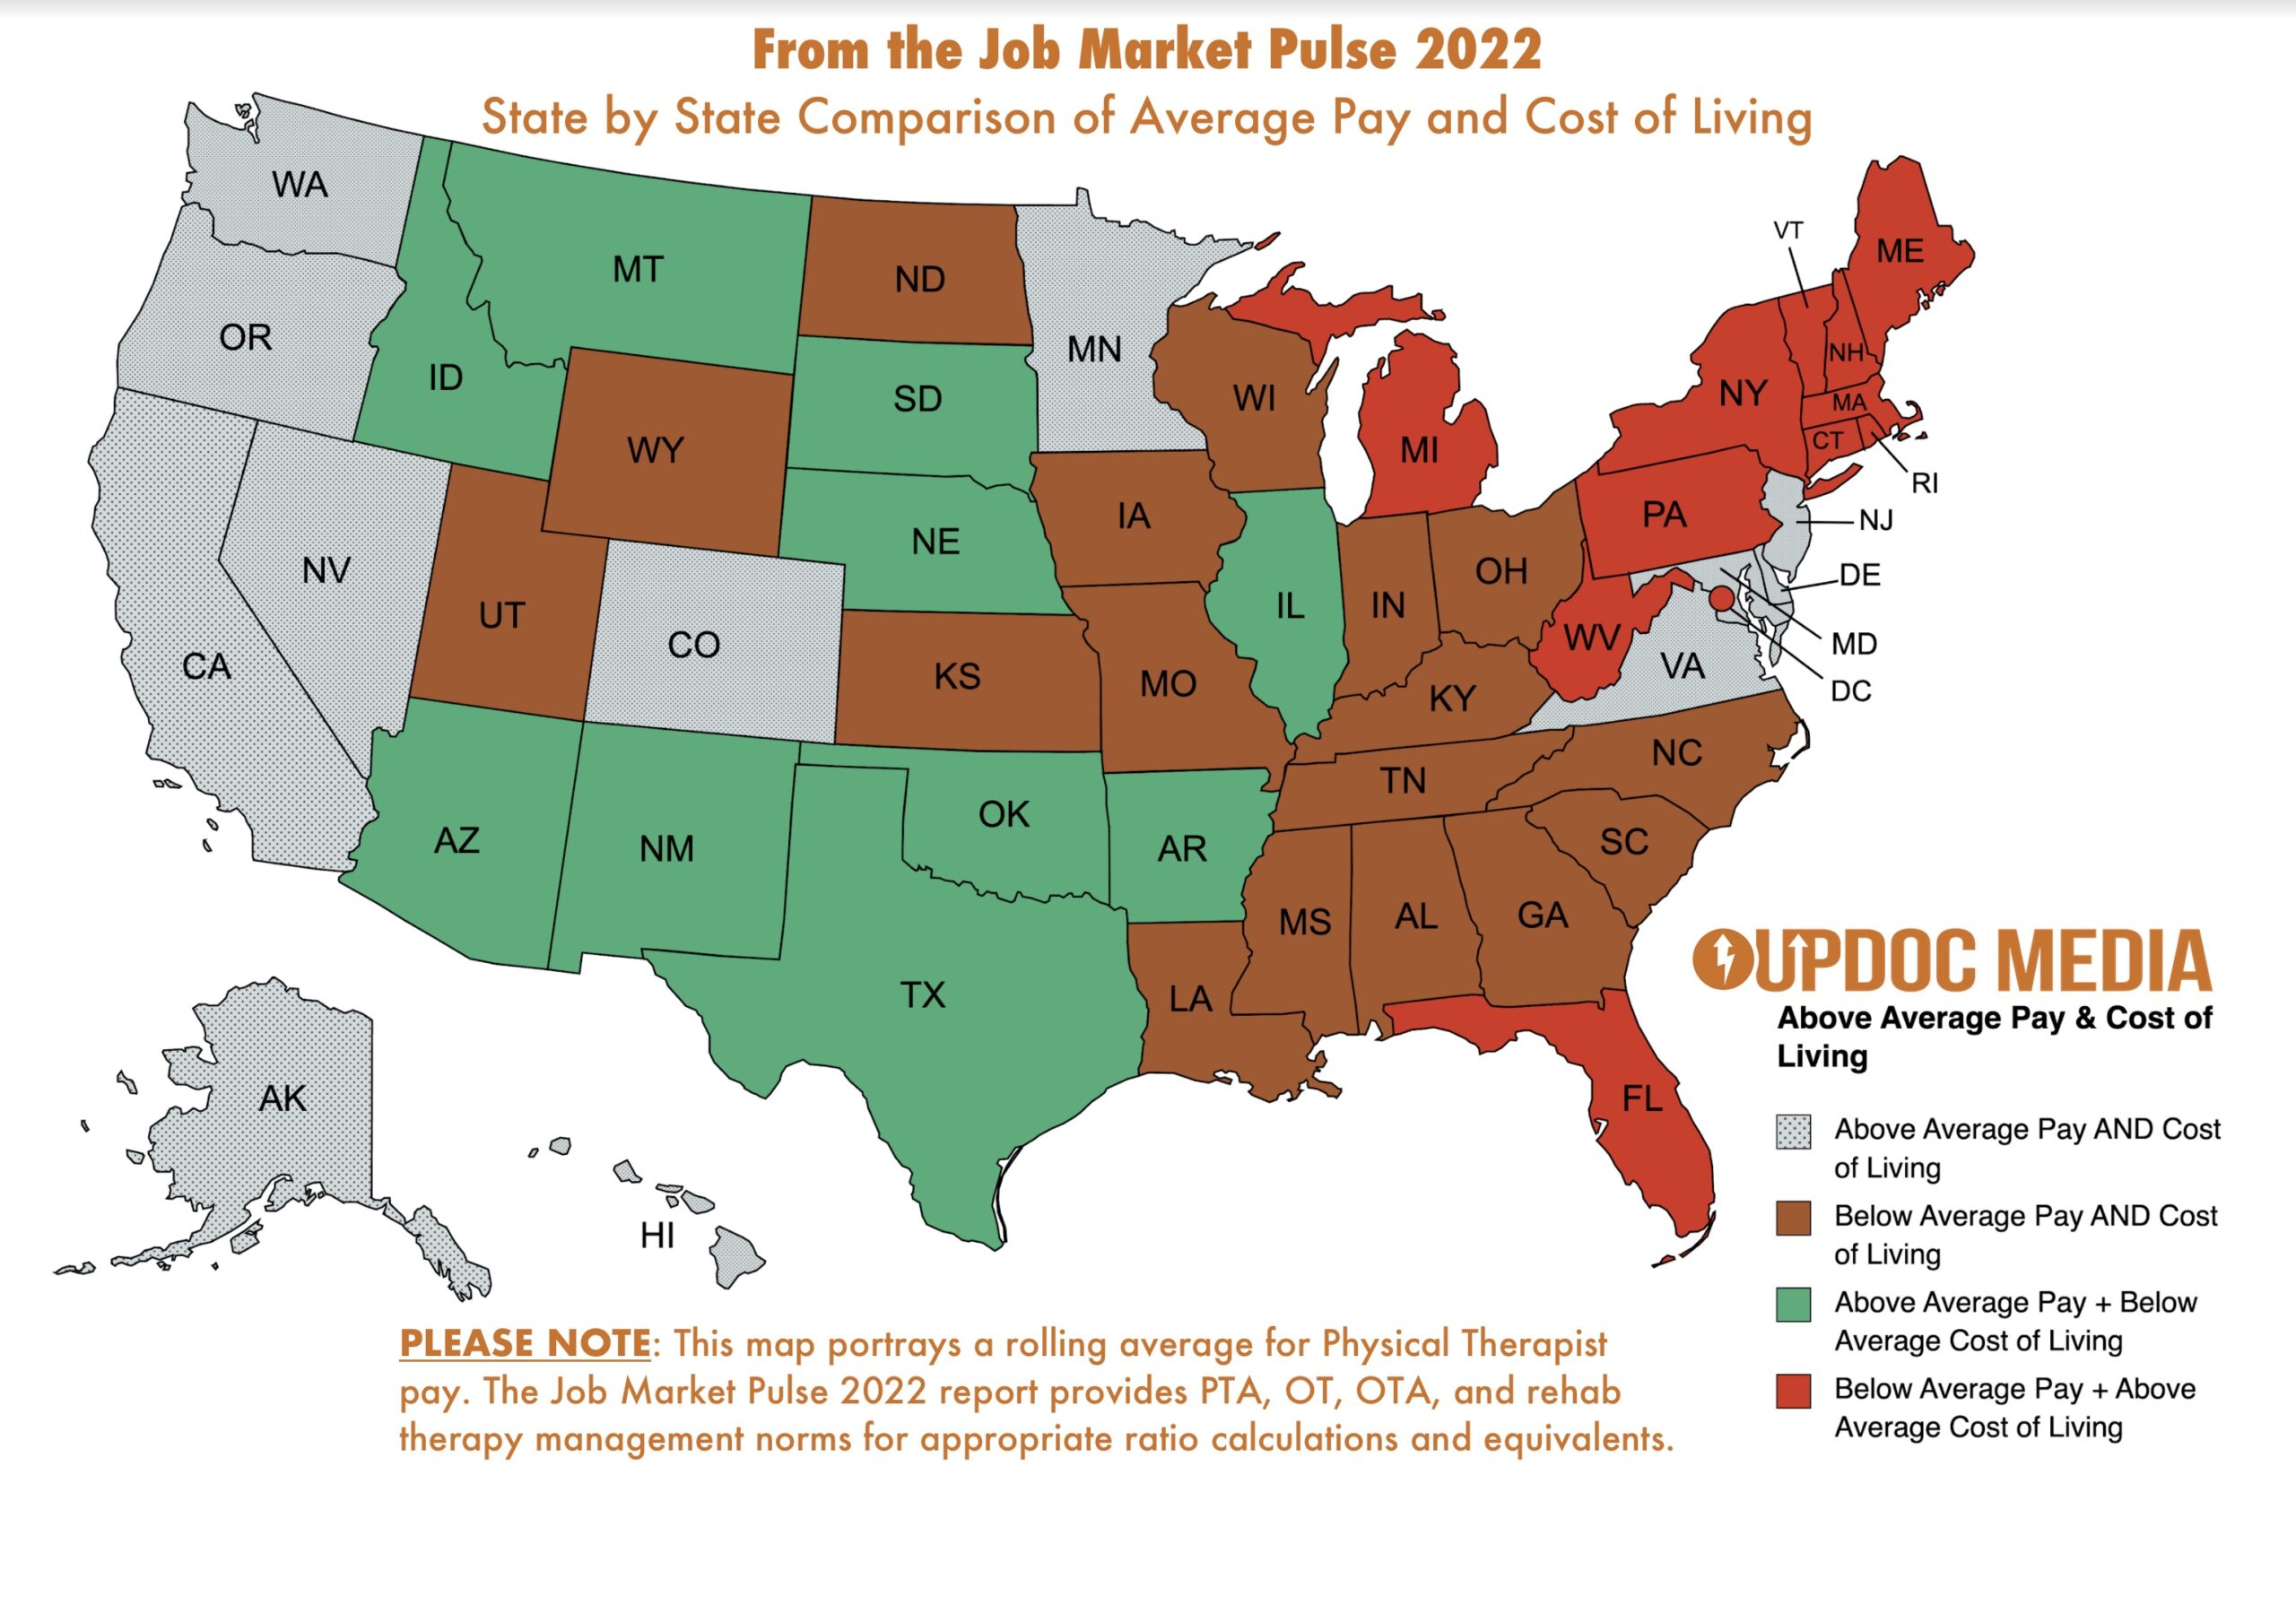 Job Market Pulse 2022 State by State Salary Report - UpDoc Media